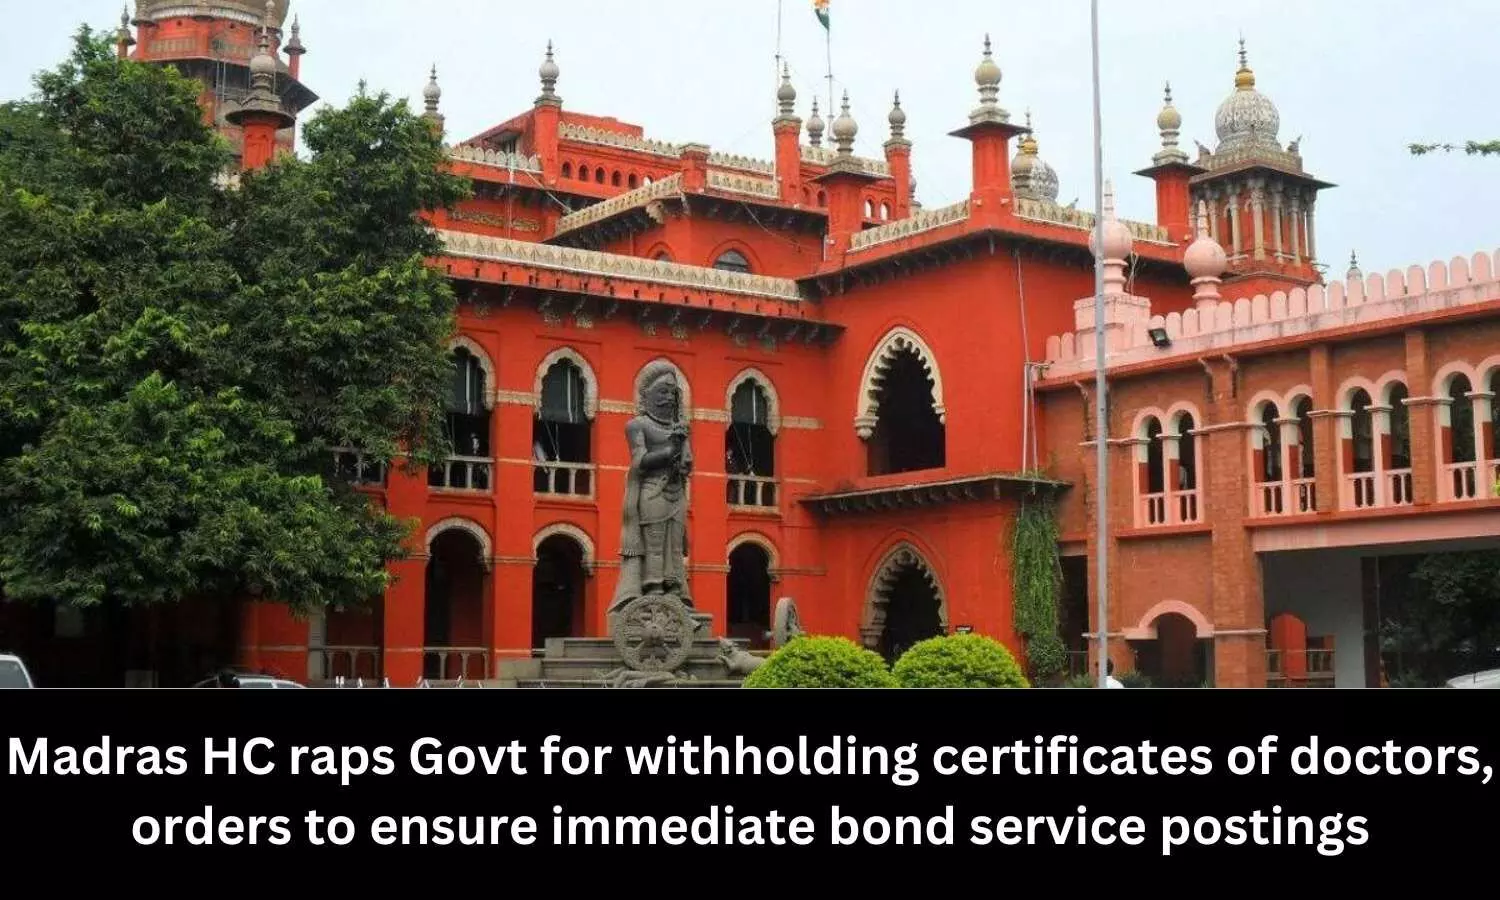 Madras HC raps Govt for withholding certificates of doctors, orders to ensure immediate bond service postings